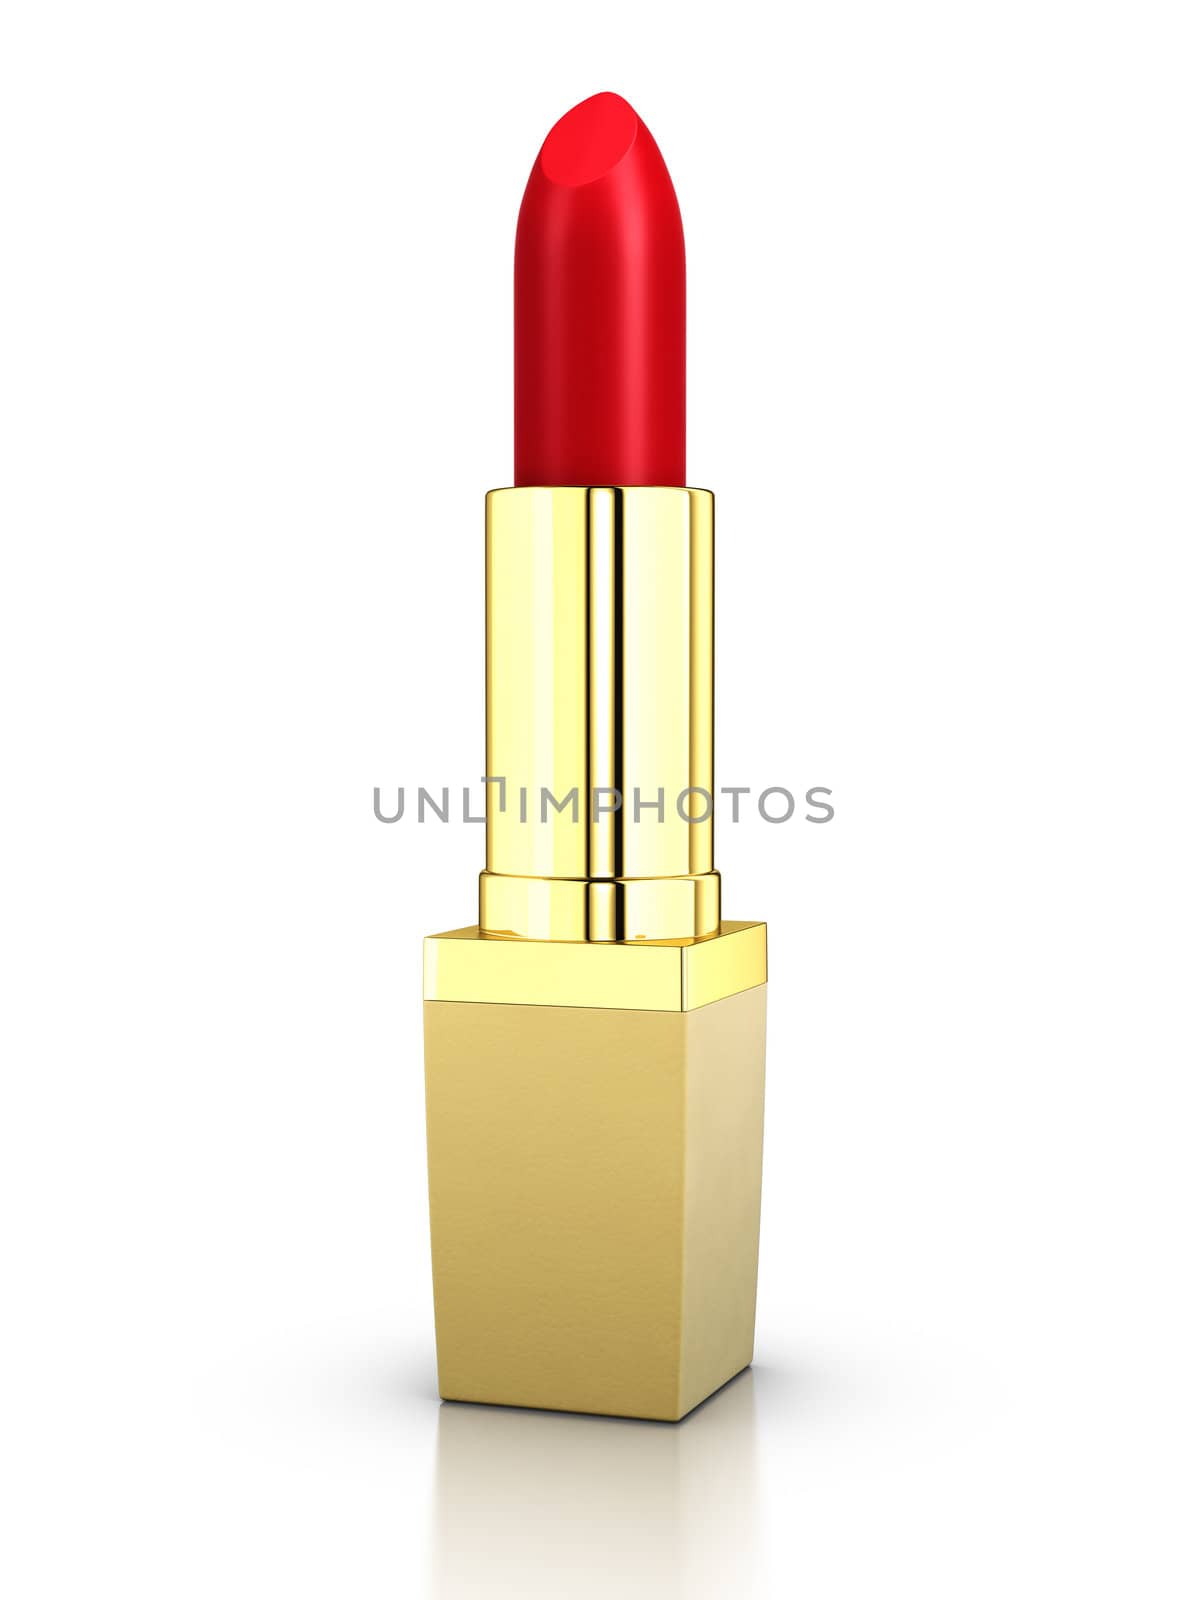 3D rendered beautiful red lipstick.